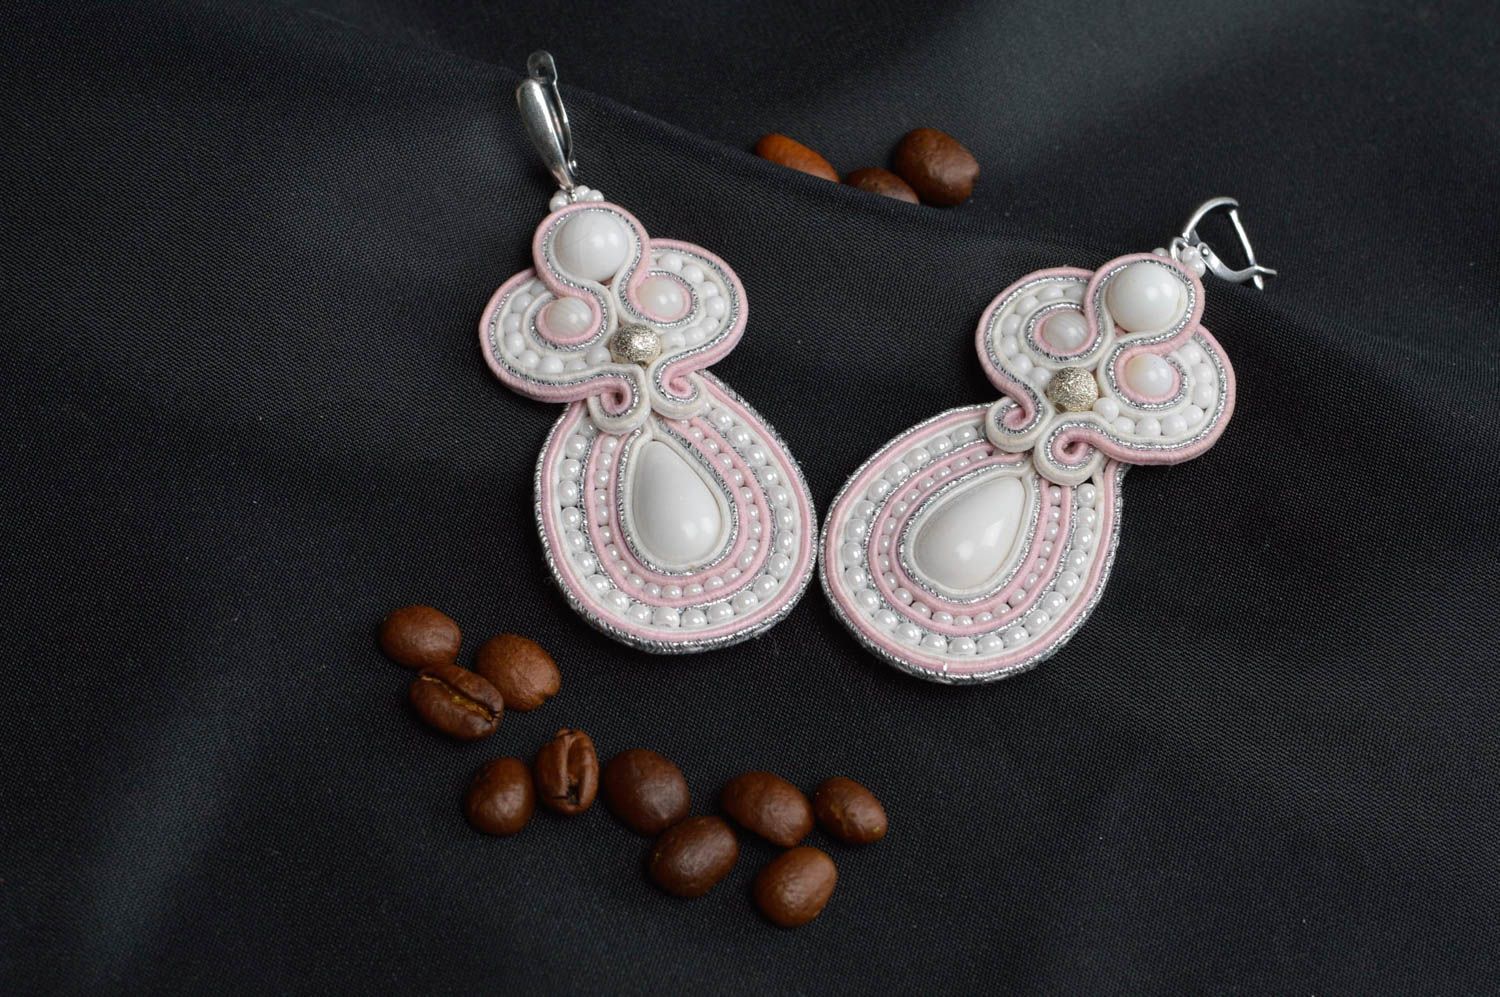 Designer handmade soutache earrings earrings with charms evening accessory photo 1